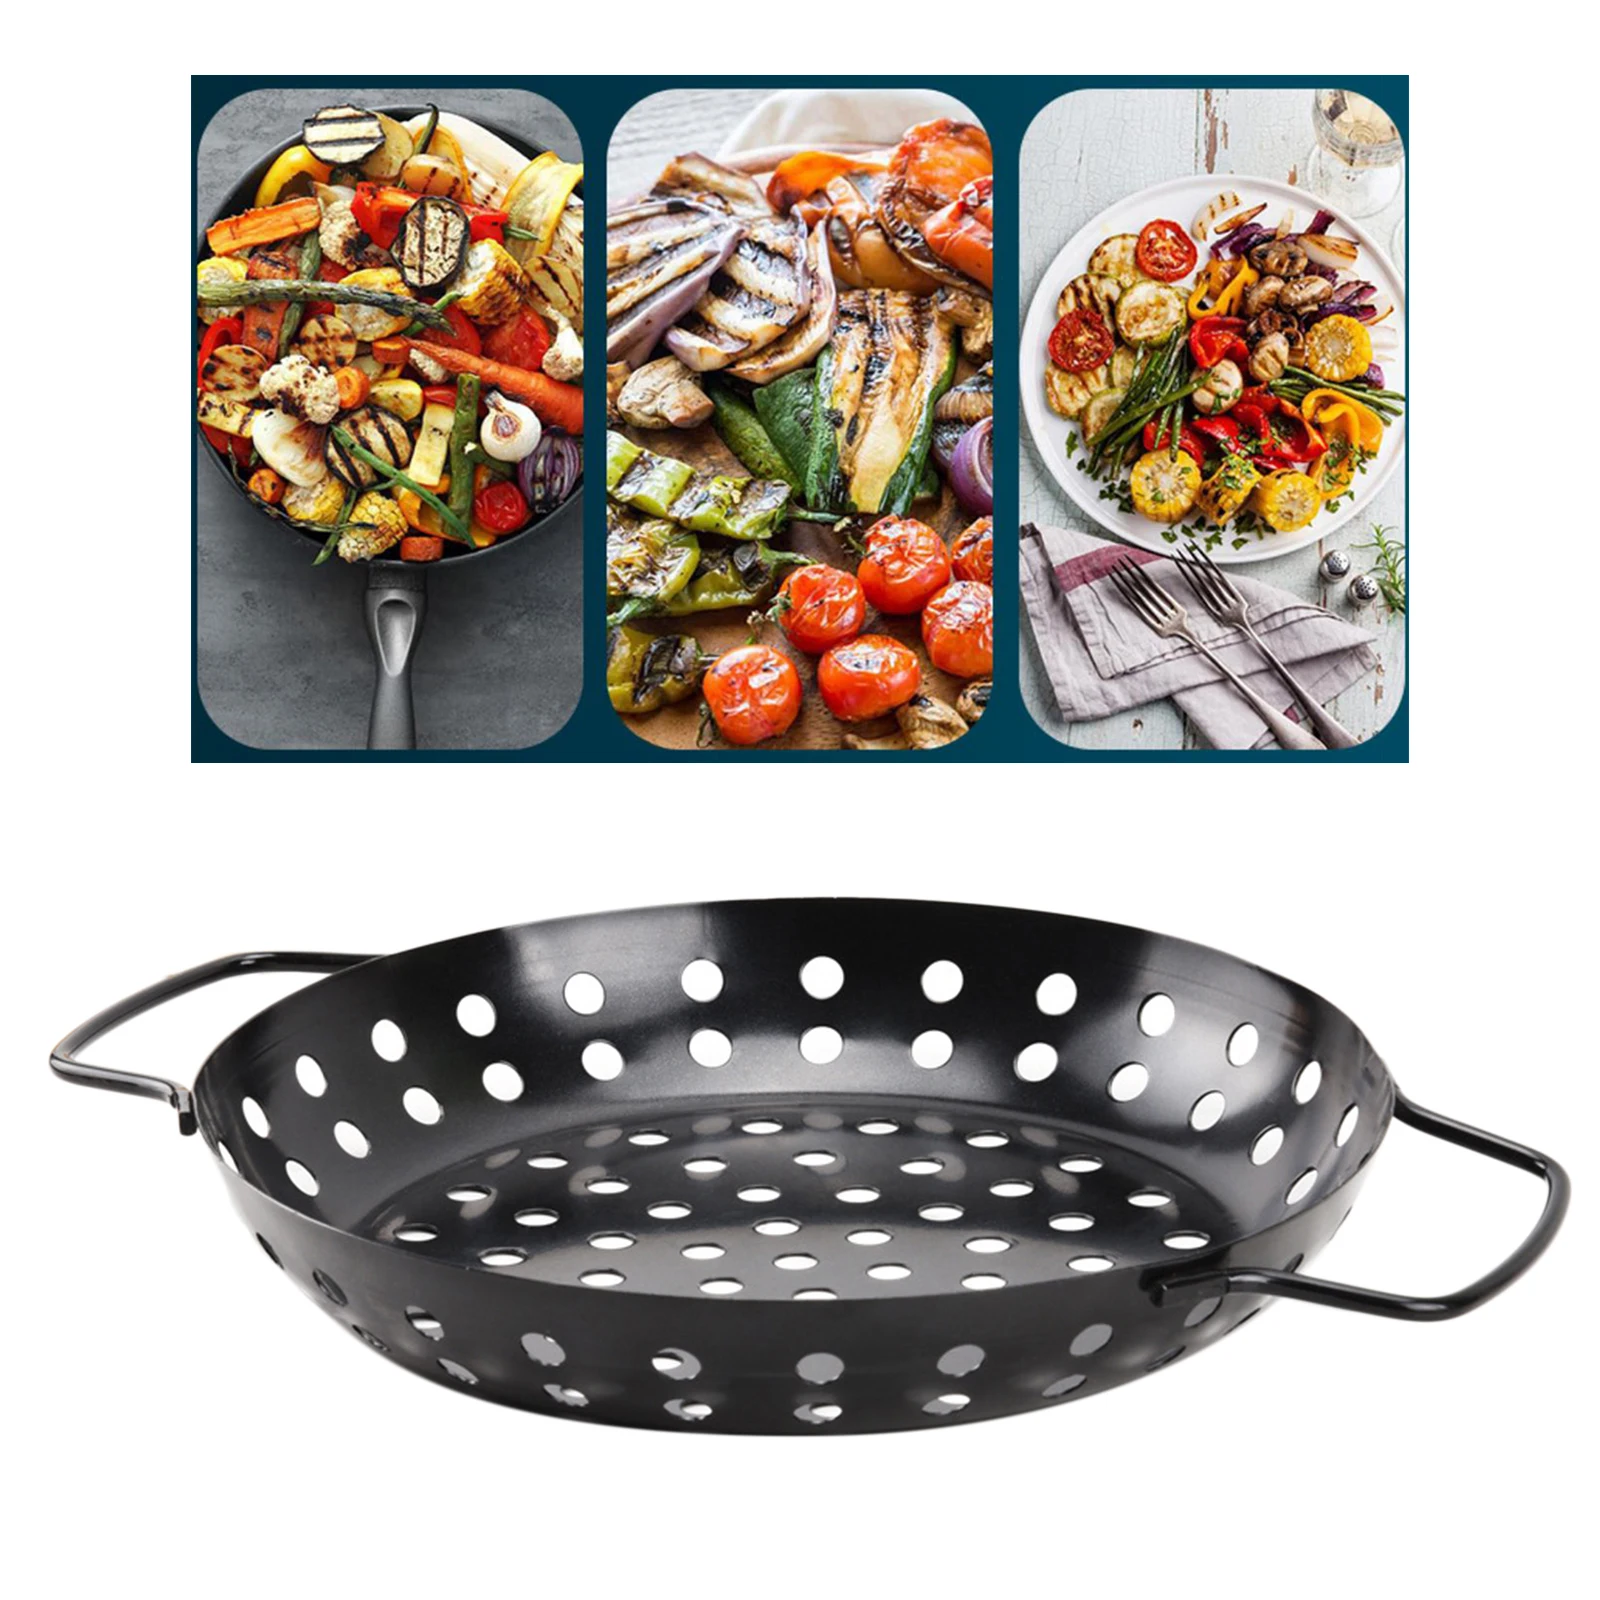 Carbon Steel BBQ Grill Pan Barbecue Grilling Tray Baking Plate for Pizza, Meat, Vegetables